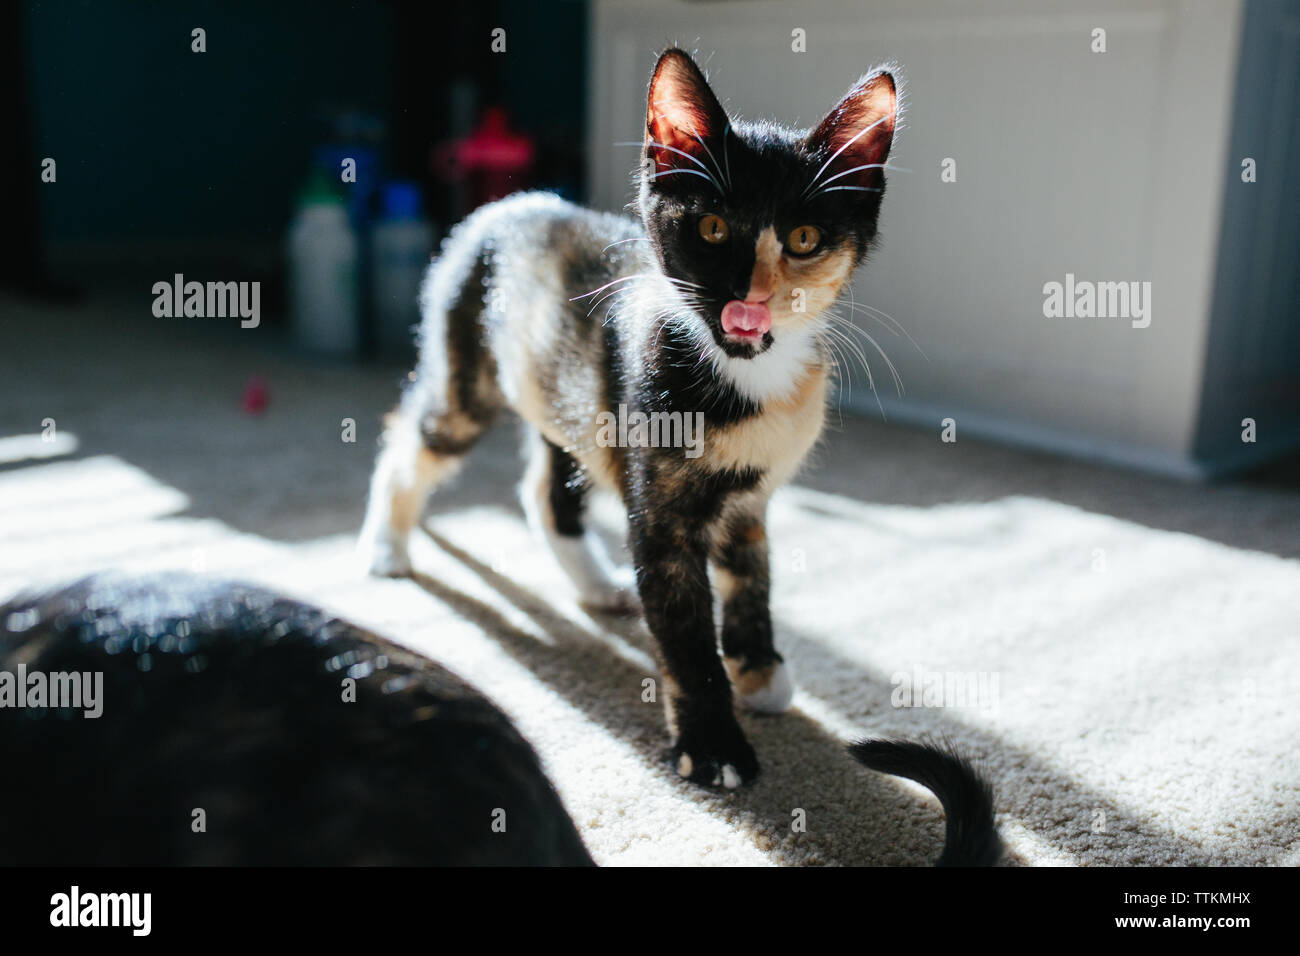 Kitten sticks tongue out at the camera Stock Photo